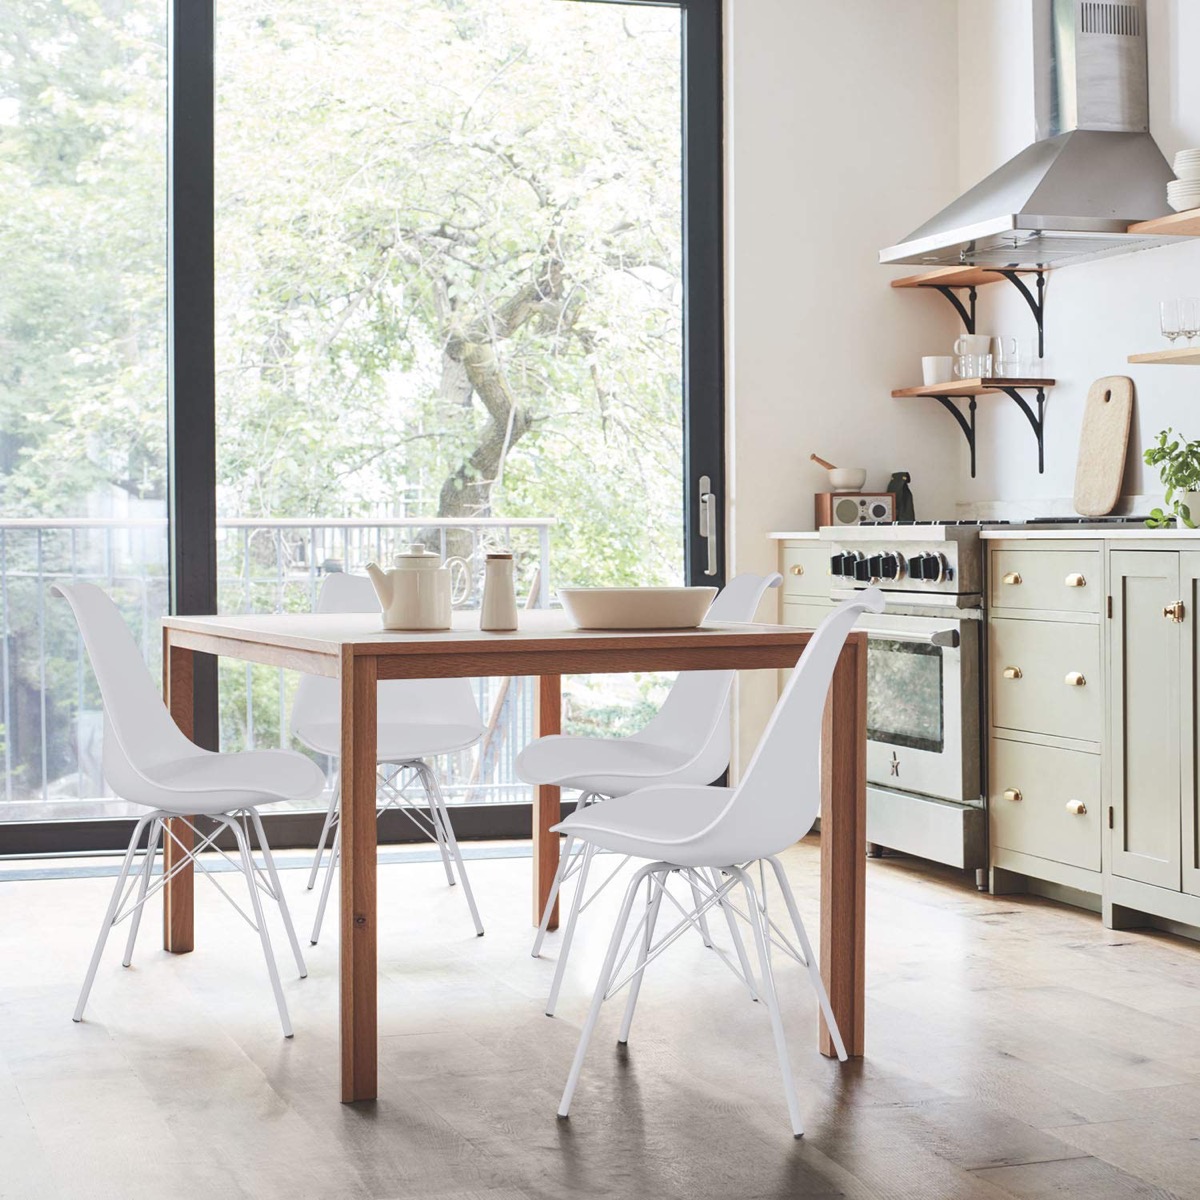 51 Kitchen Chairs To Instantly Update, Nice Dining Table Chairs